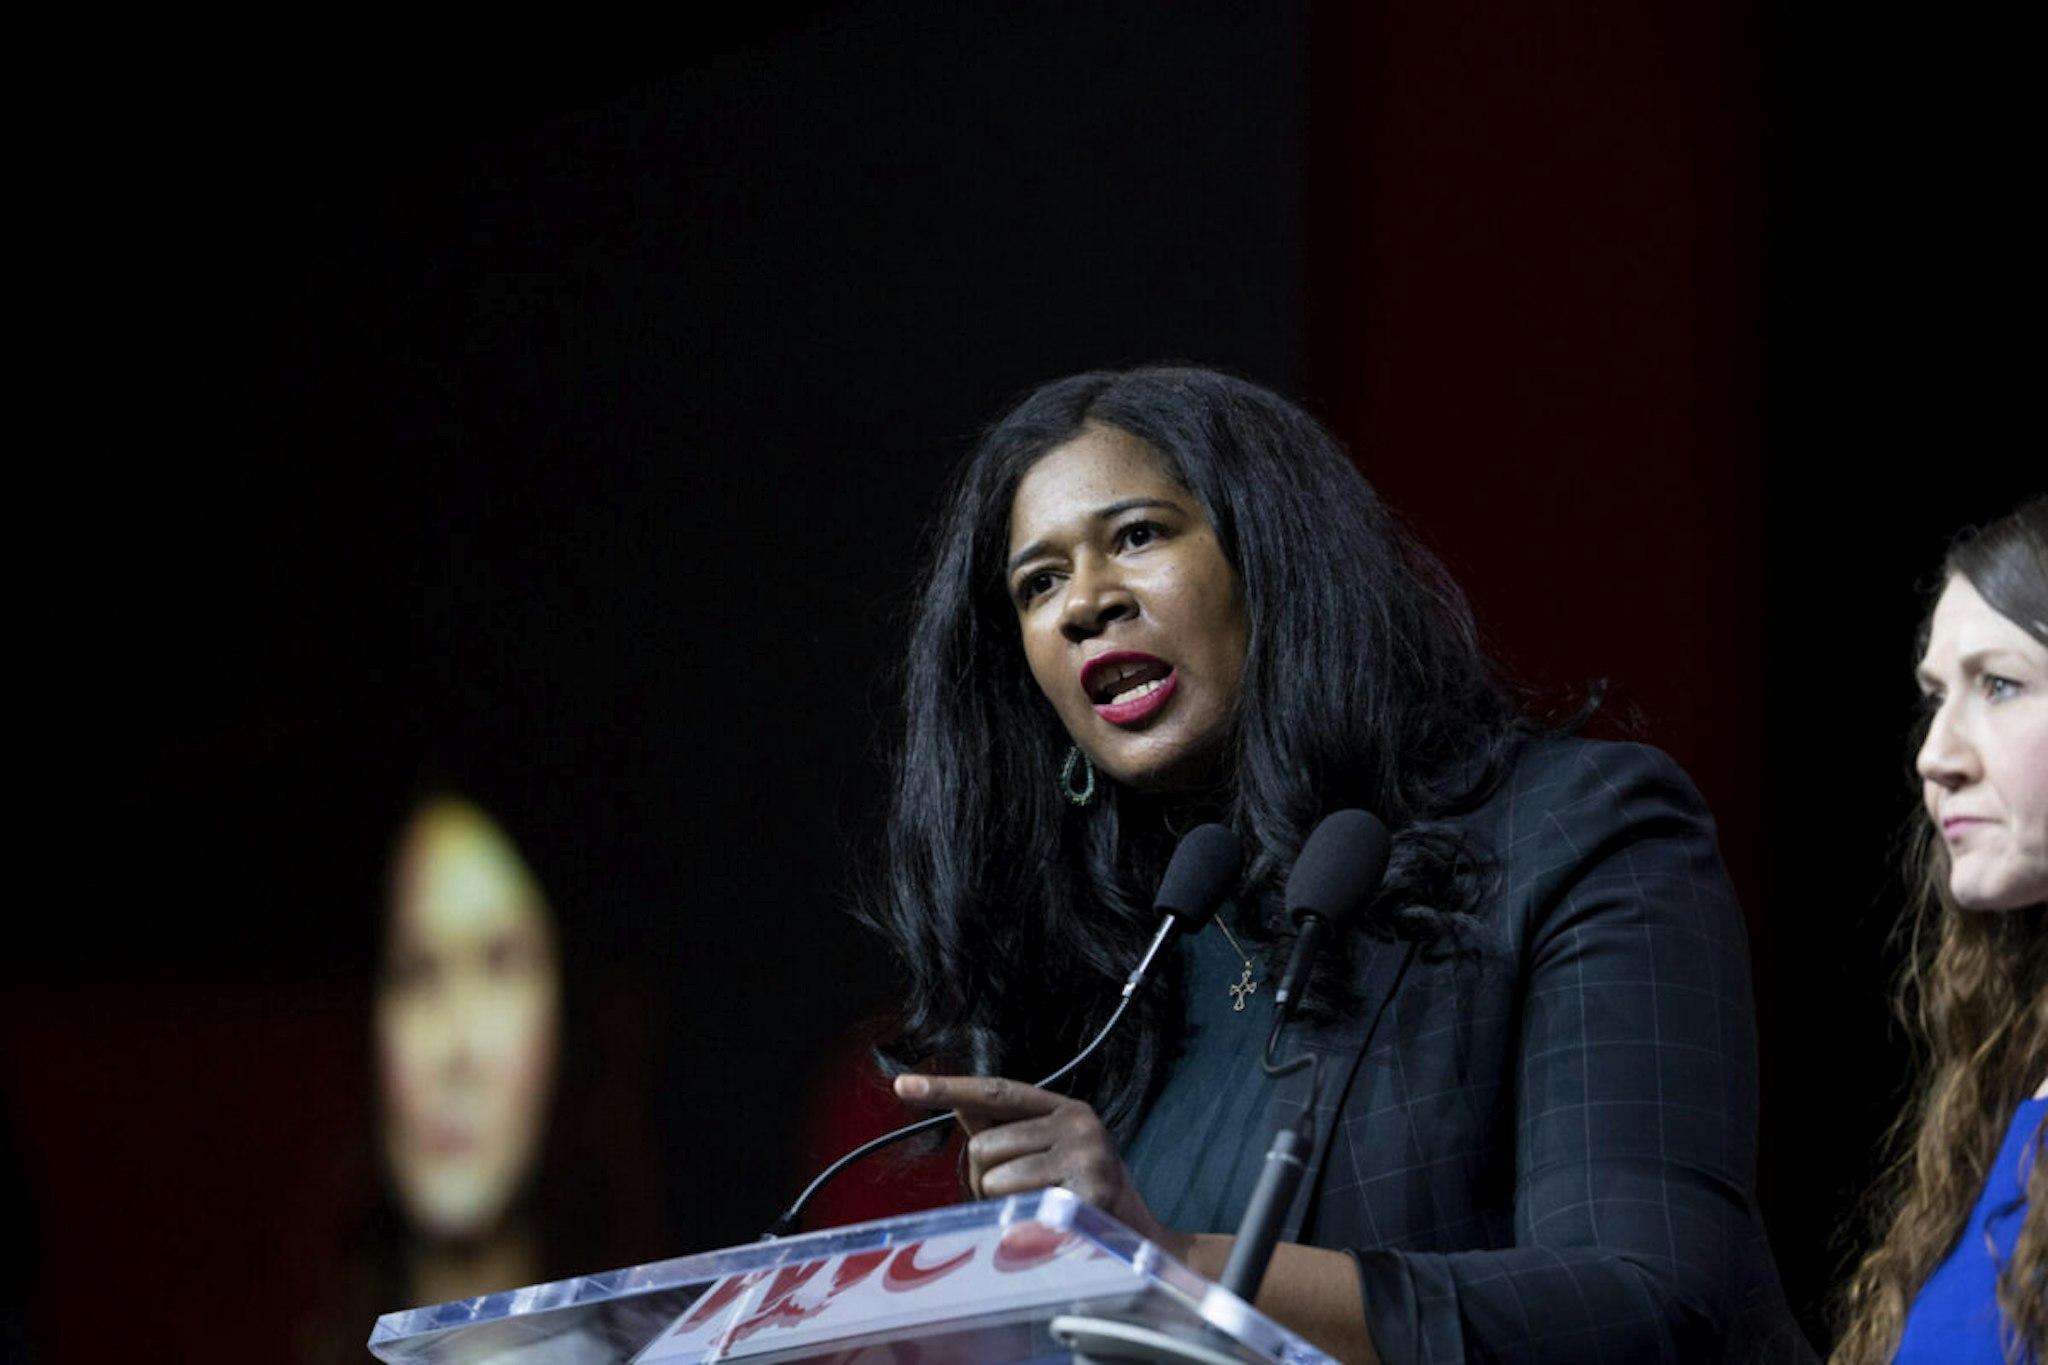 Lansing, MI - February 18: Kristina Karamo addresses the delegates before they vote for Michigan Republican Party Chair at the Michigan Republican Convention in Lansing, Michigan, on Saturday, February 18, 2023. Karamo won in the third round of voting.